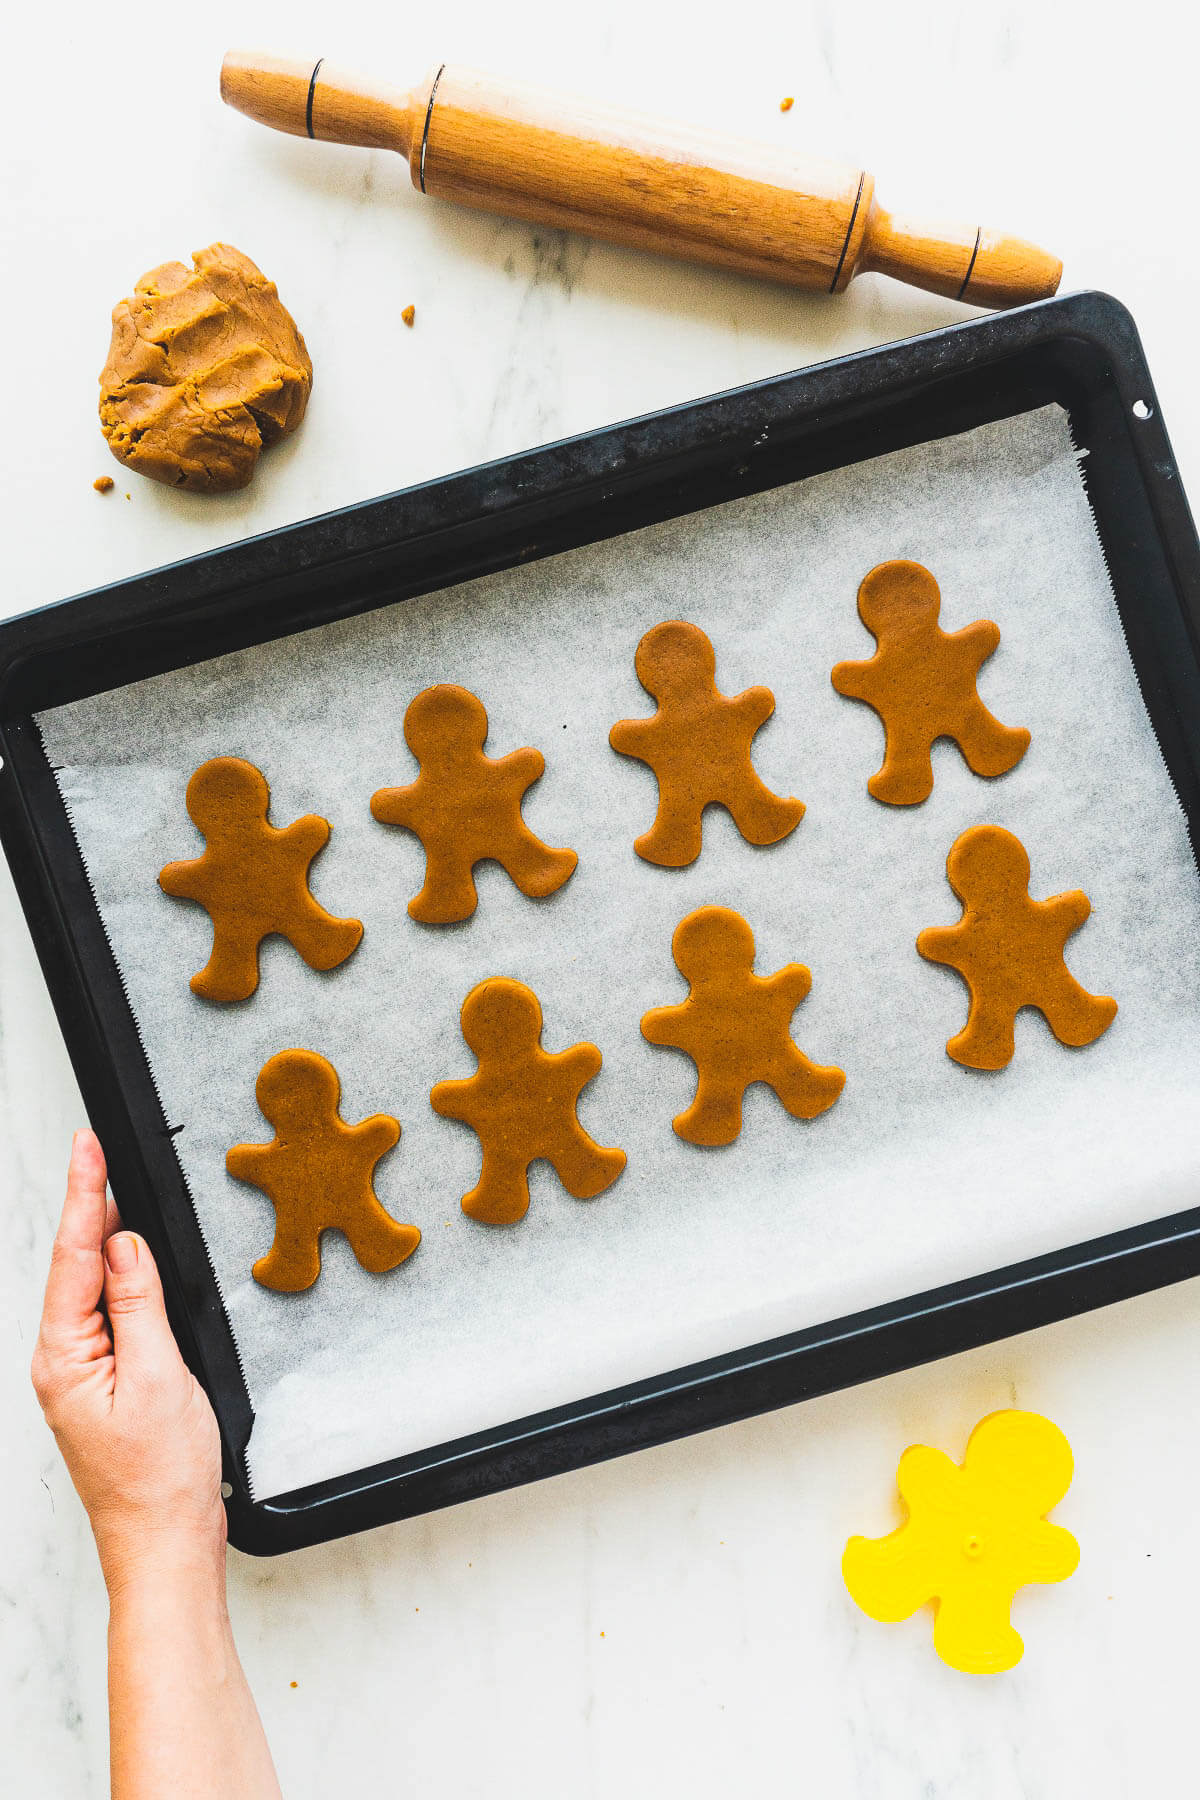 A baking sheet full of unbaked gingerbread cookies on parchment paper.